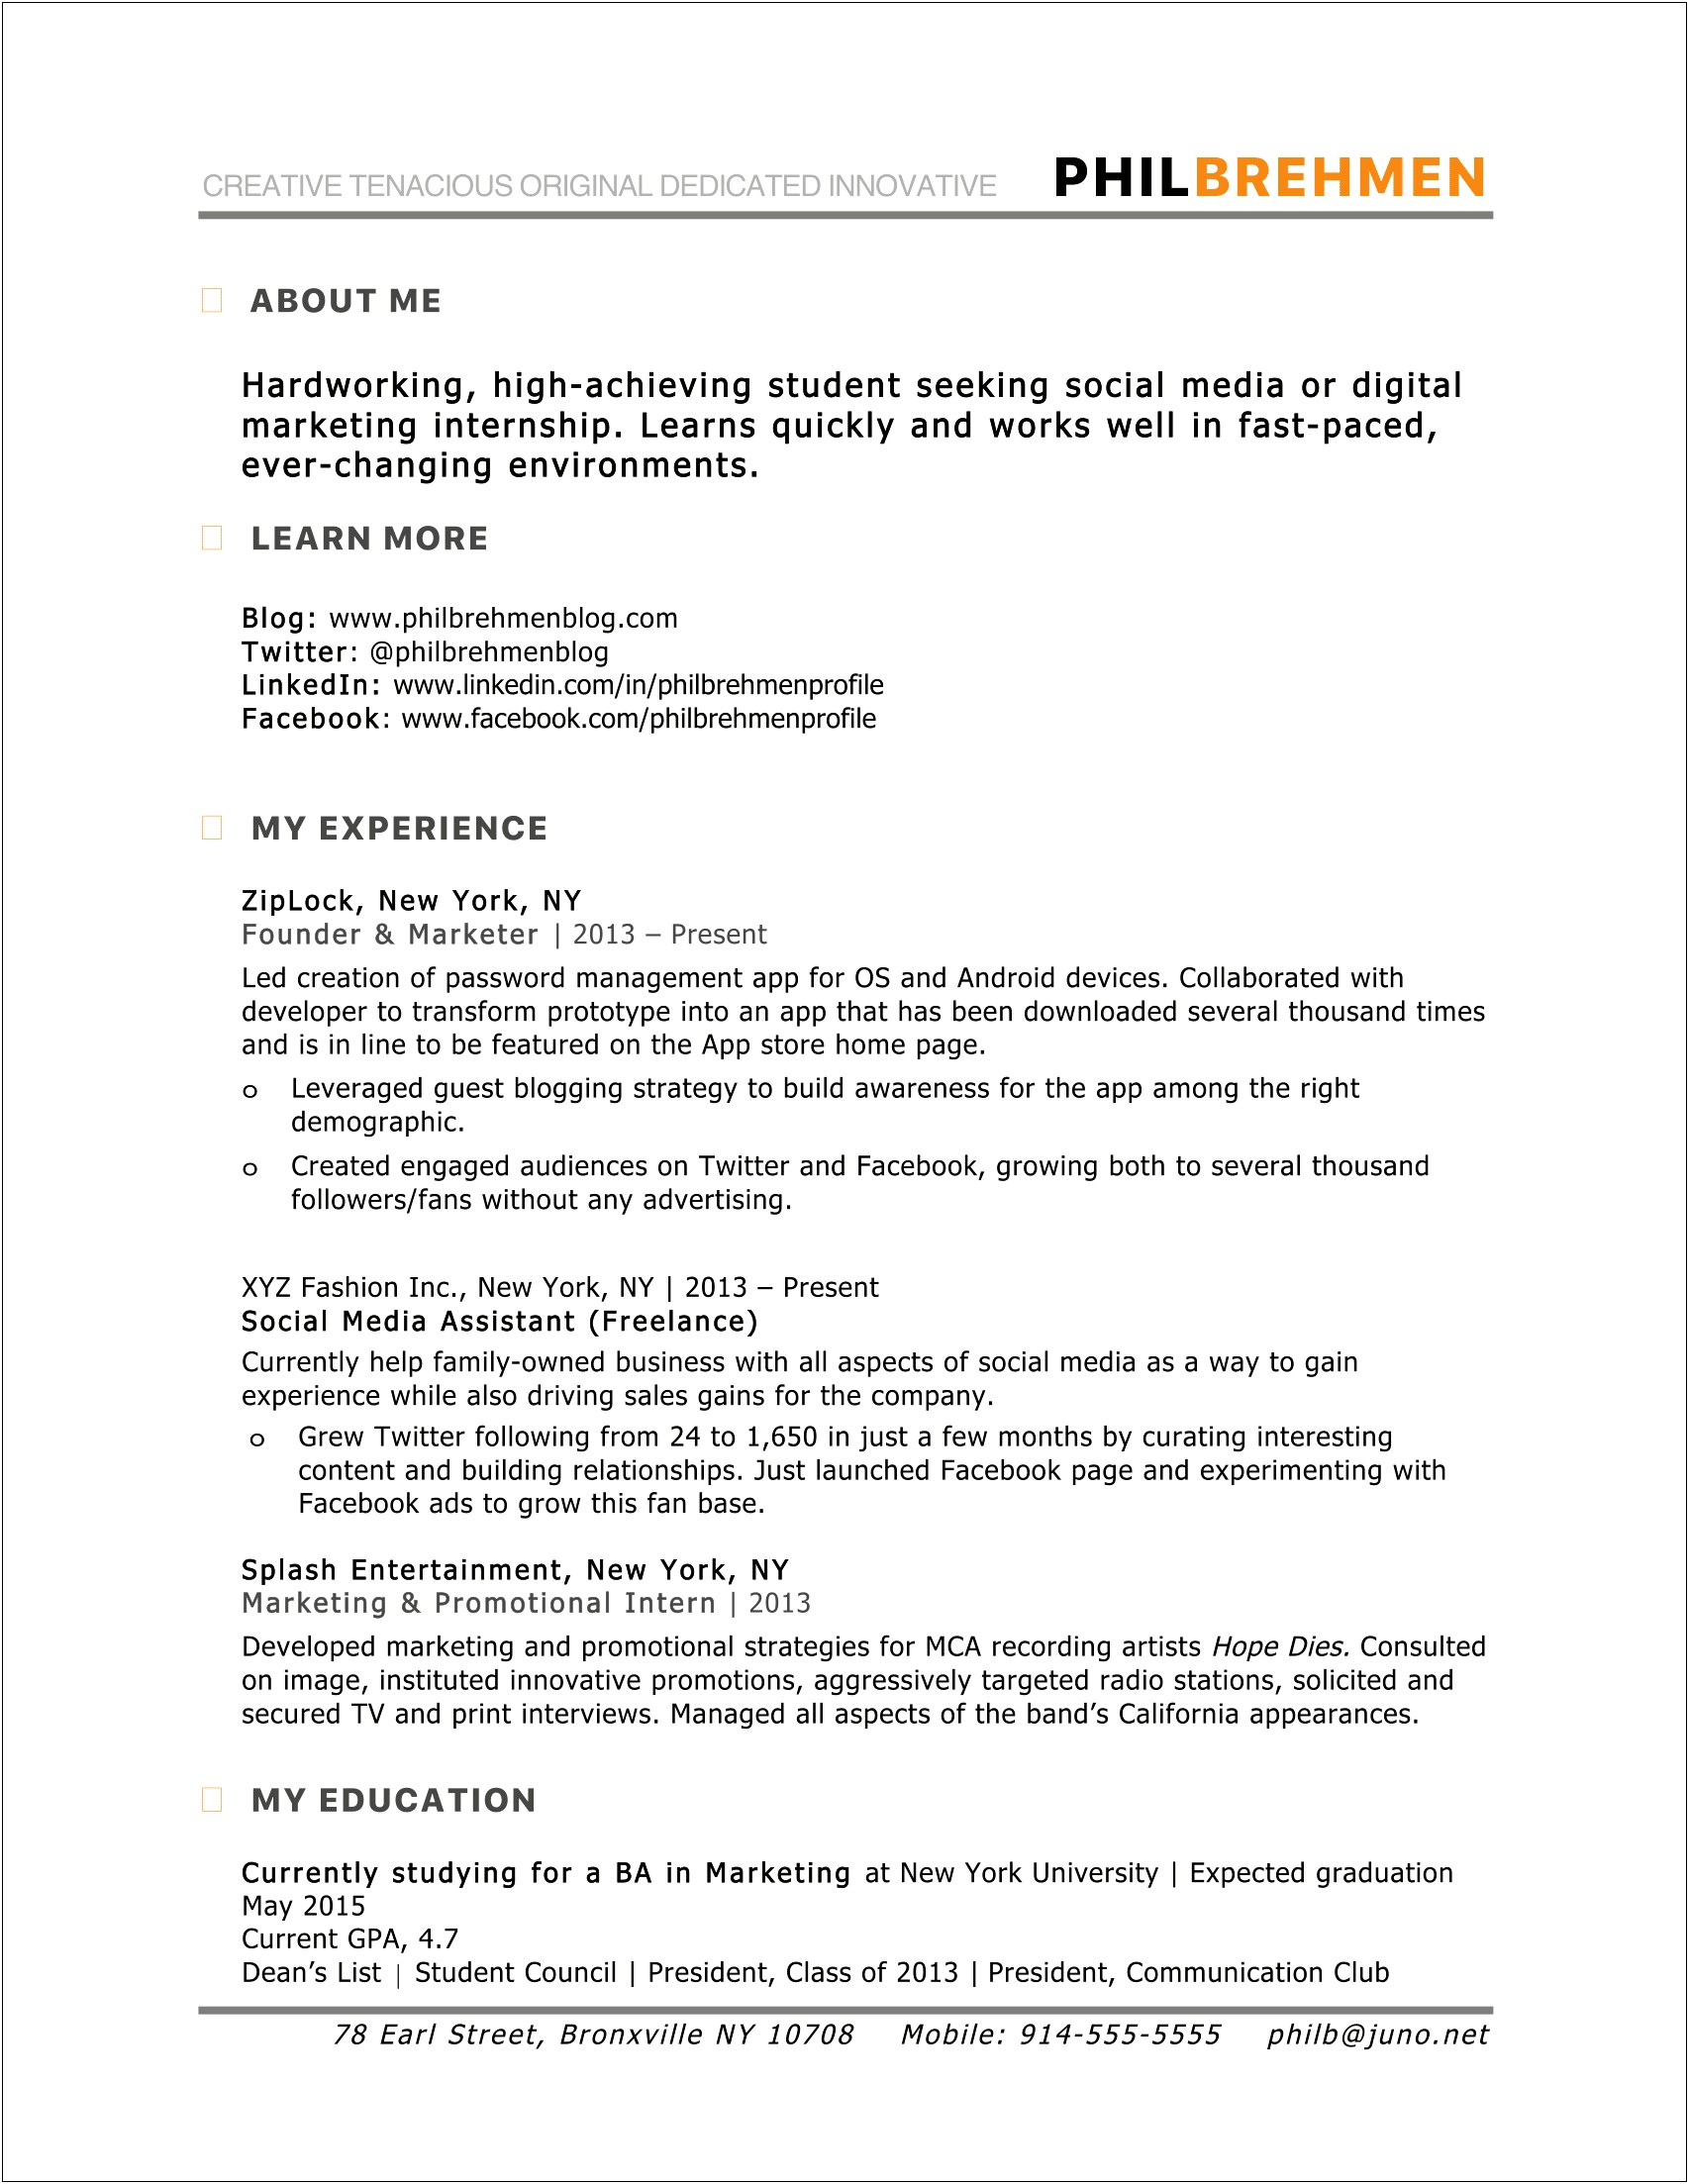 Objective On Resume Examples Social Media